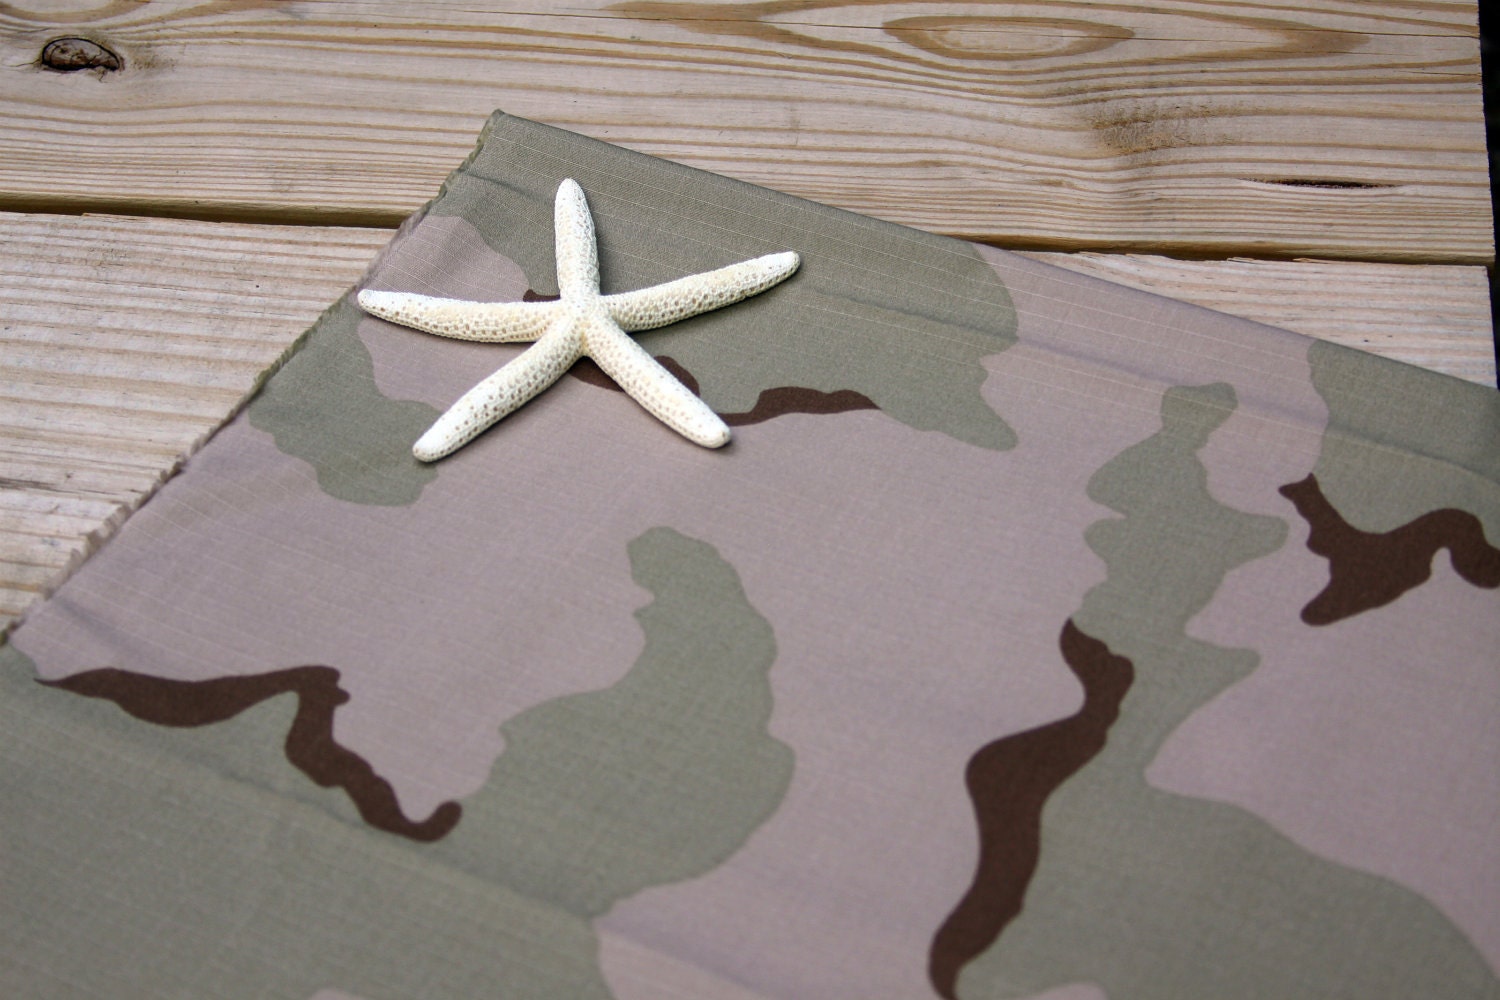 Popular items for Camouflage fabric on Etsy